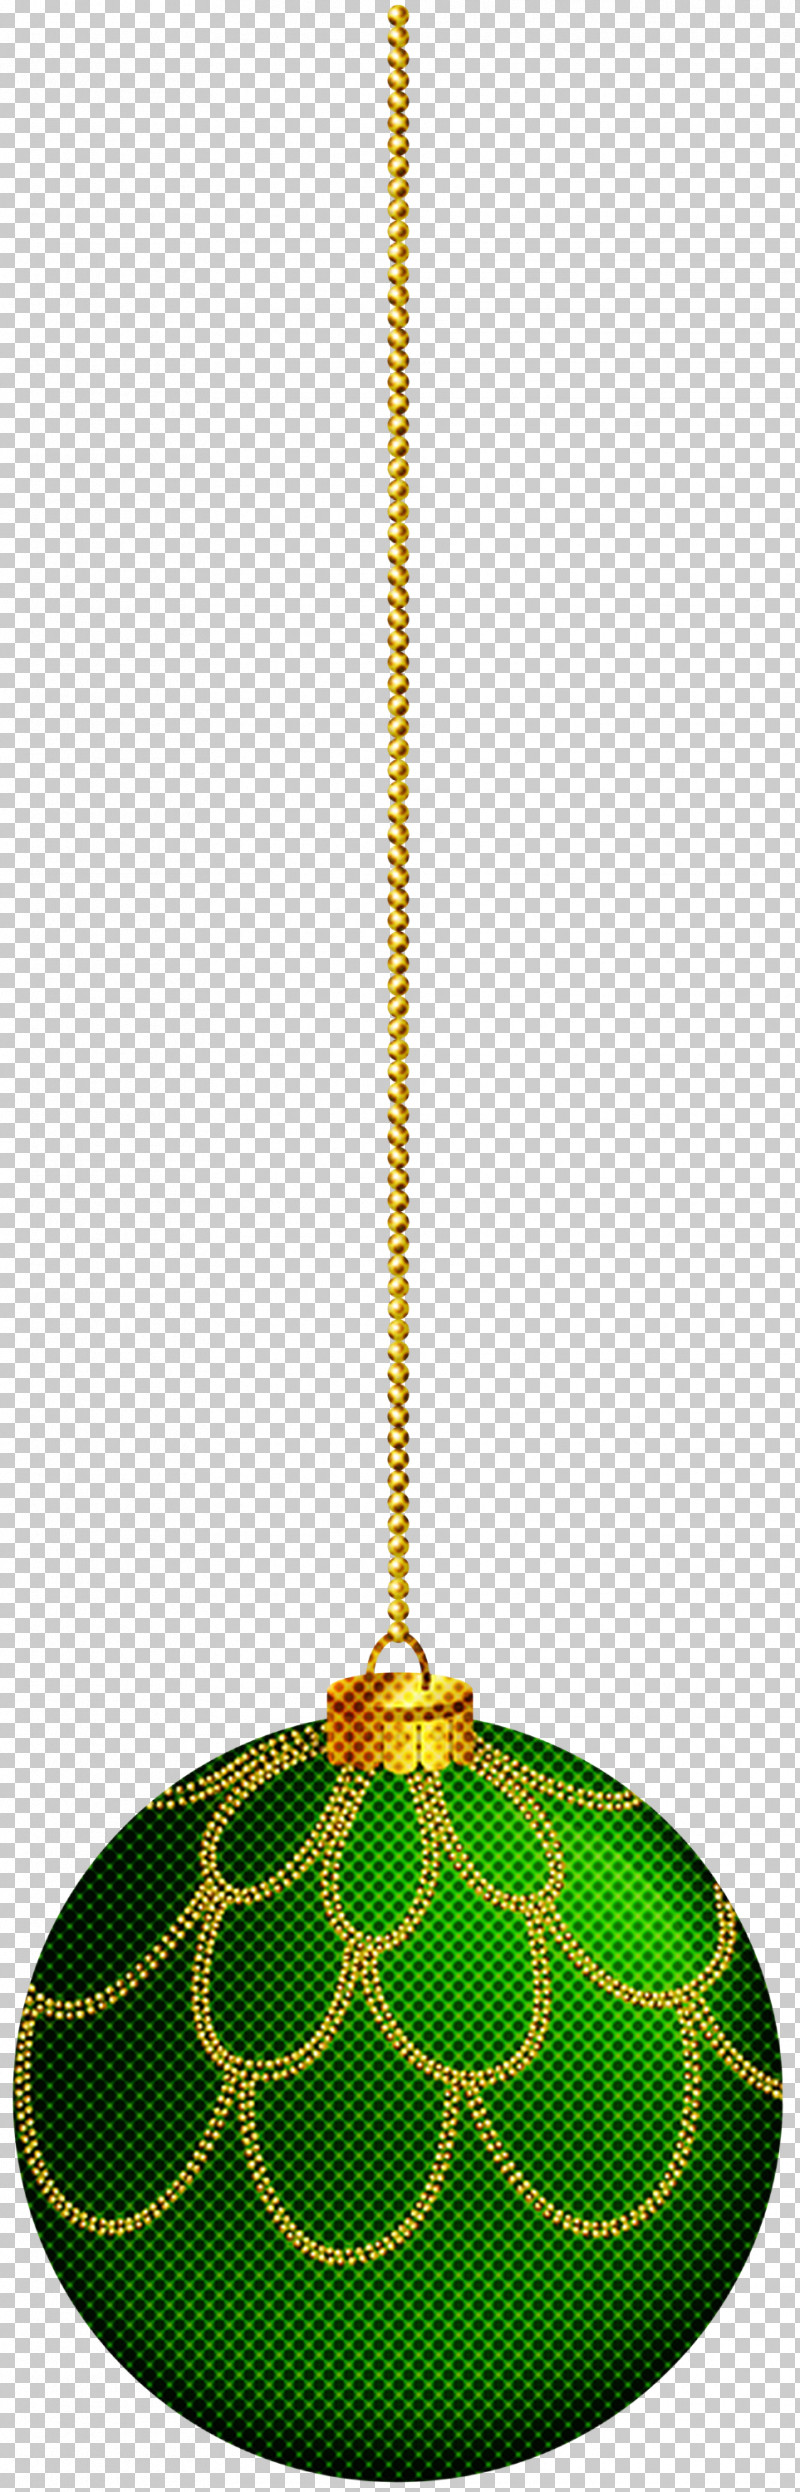 Yellow Necklace Chain Jewellery Light Fixture PNG, Clipart, Chain, Jewellery, Light Fixture, Metal, Necklace Free PNG Download